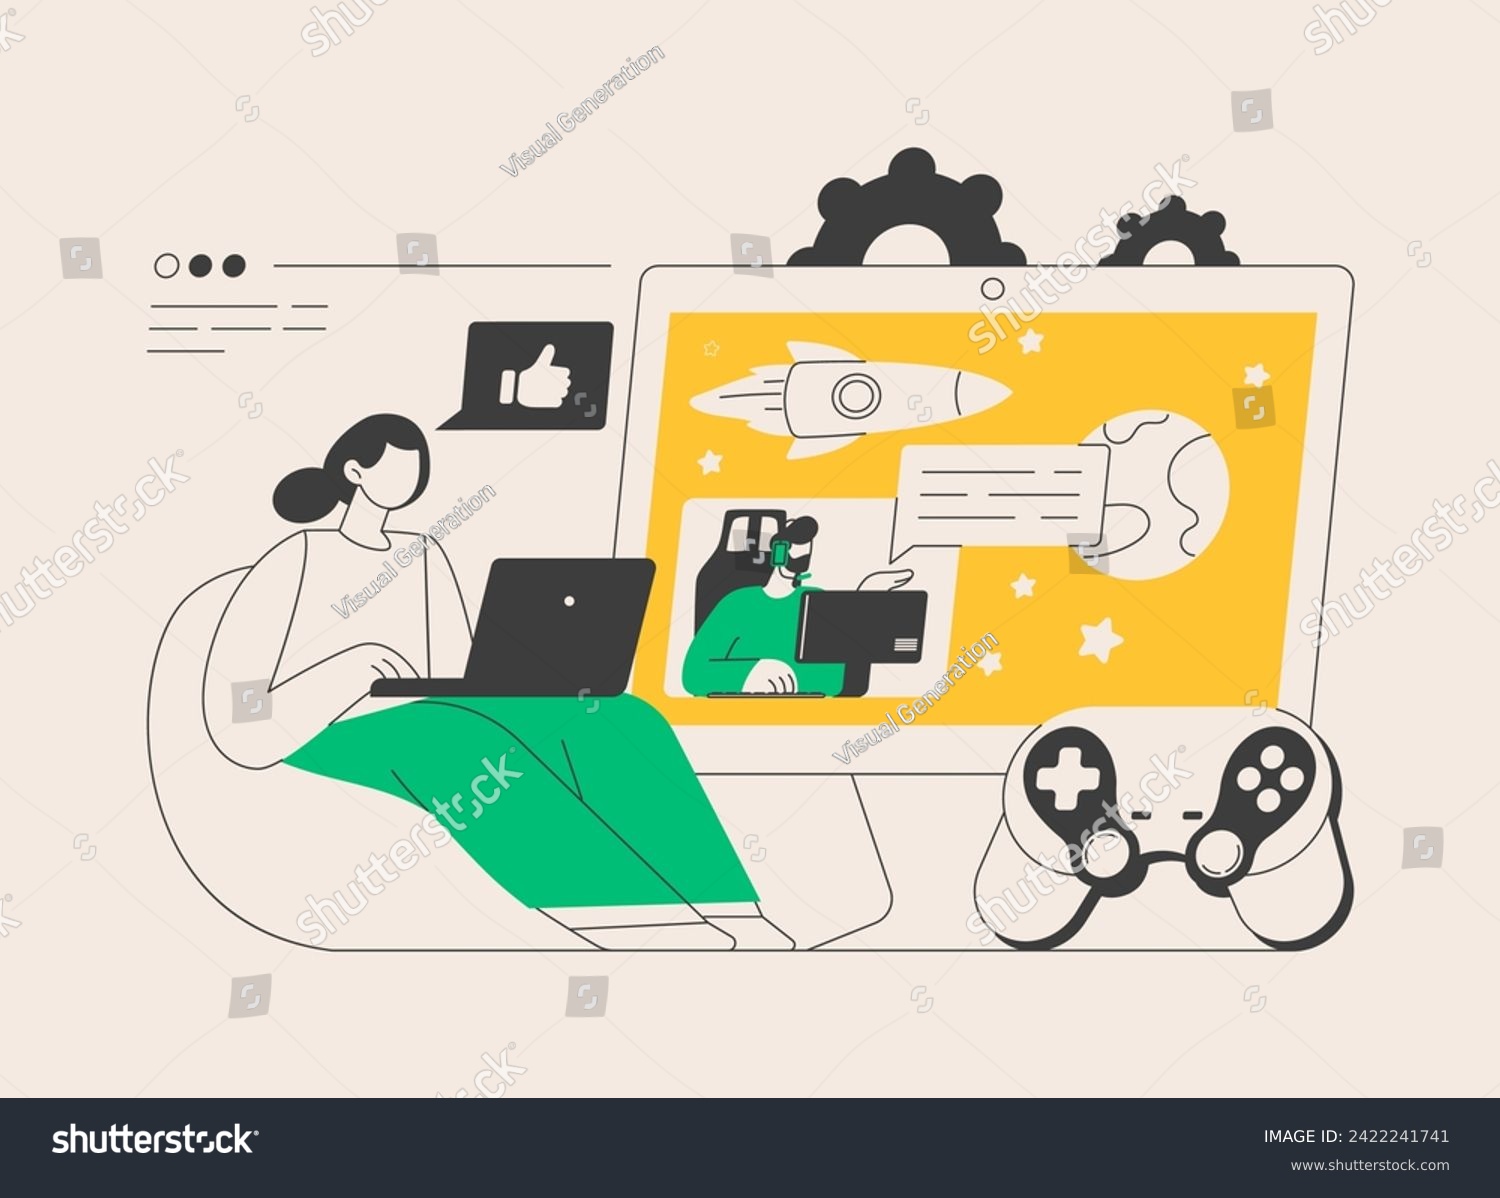 Video game walkthrough abstract concept vector illustration. Online walkthrough video, popular pc game content, gaming stream, playthrough, console playing, improving skill abstract metaphor. #2422241741